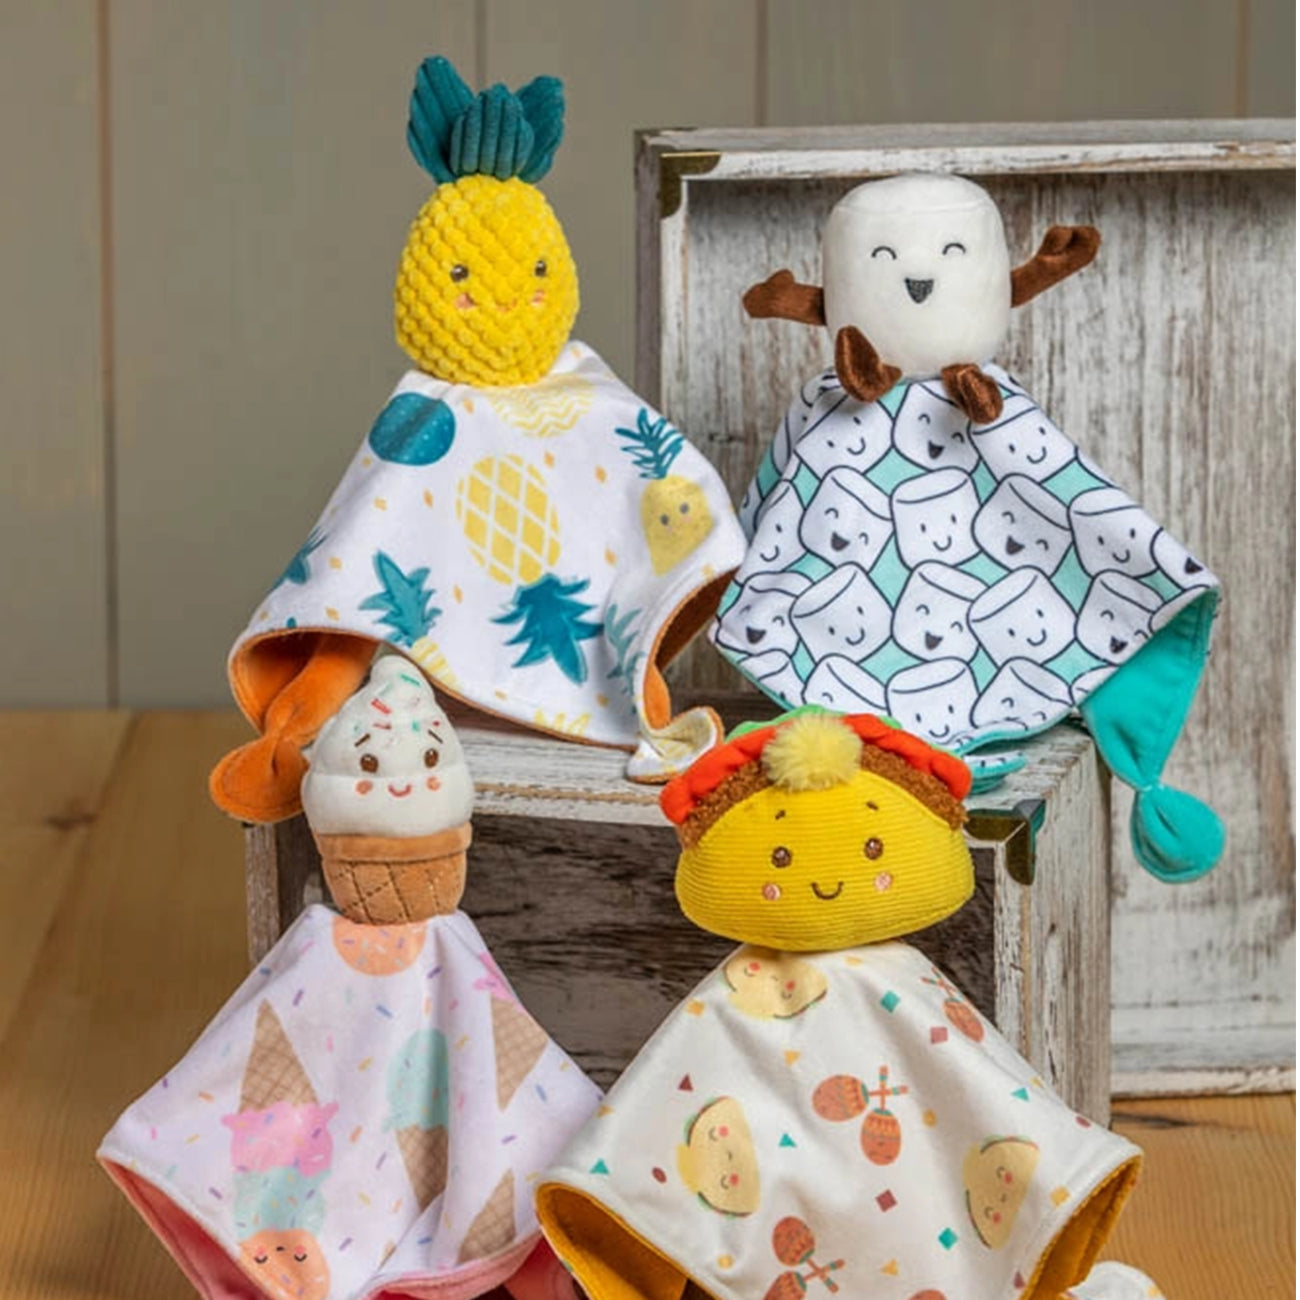 Jucarie plus doudou, Taco Soothie, 25x25 cm, +0 luni,  Mary Meyer